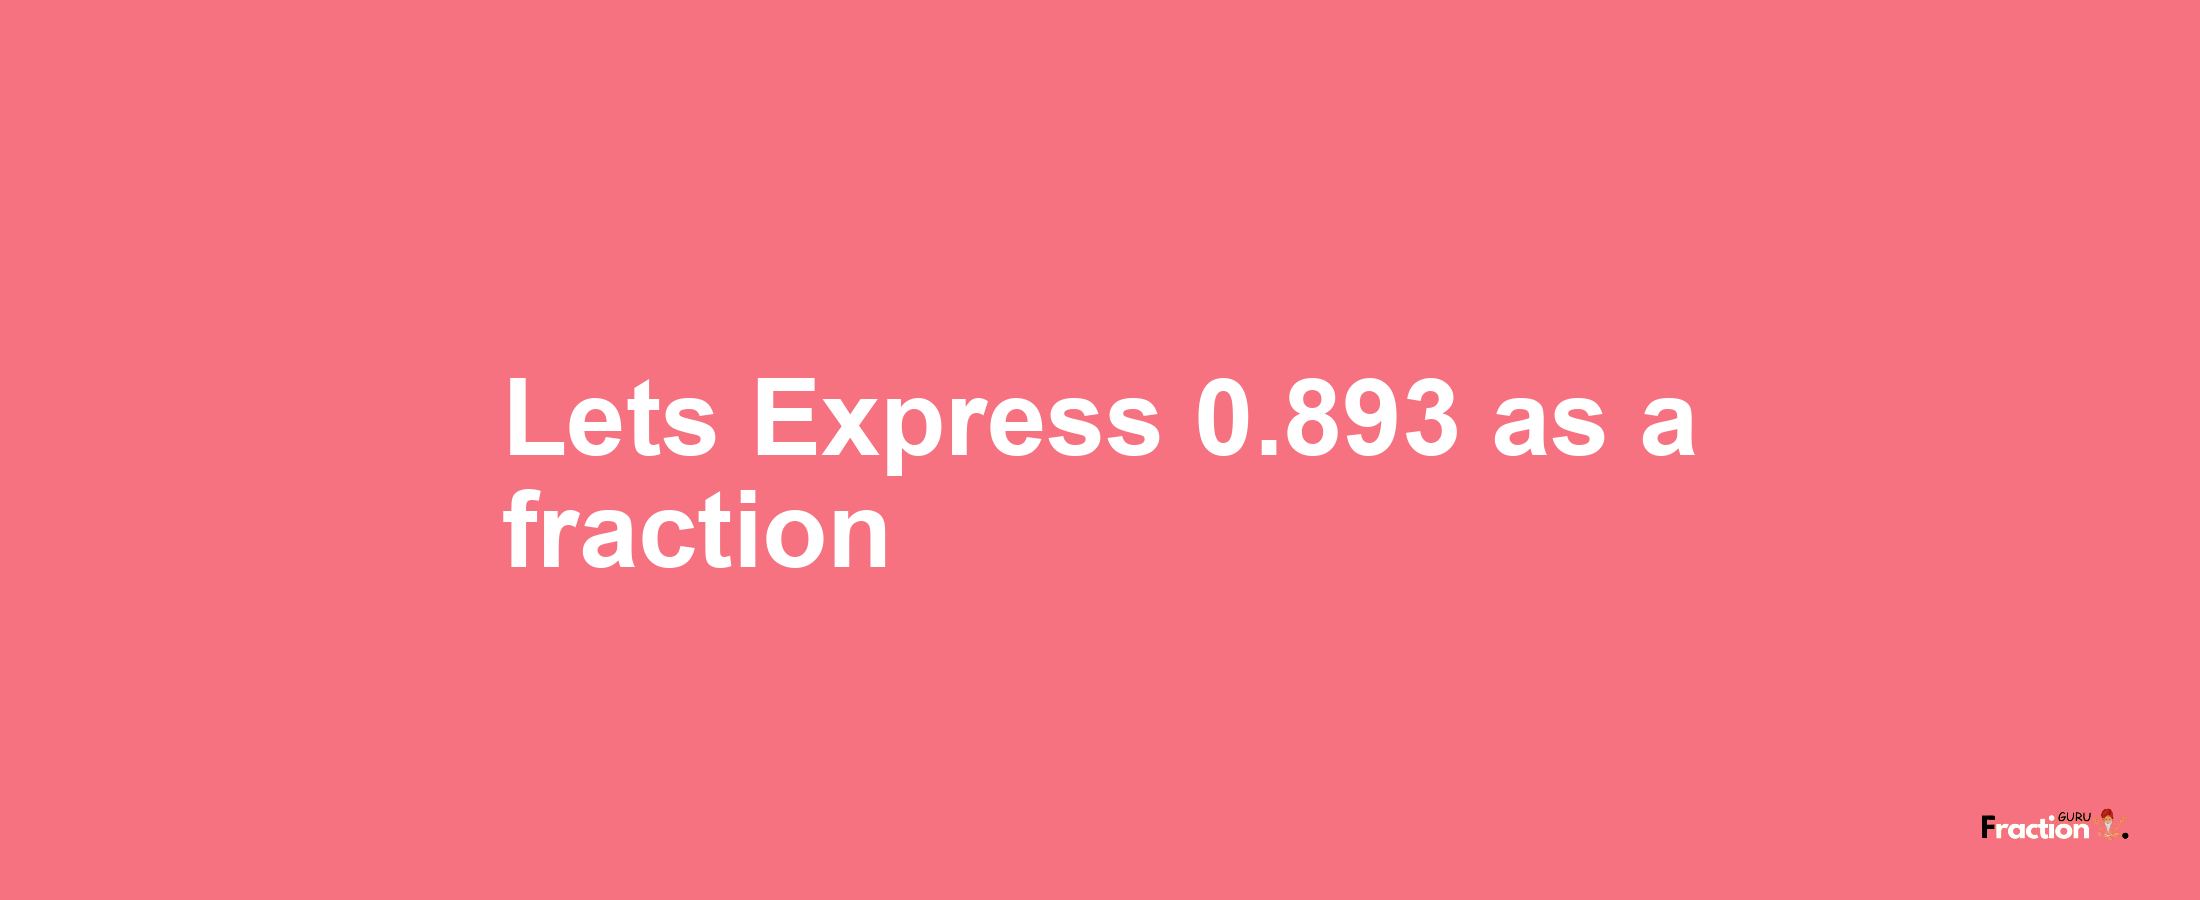 Lets Express 0.893 as afraction